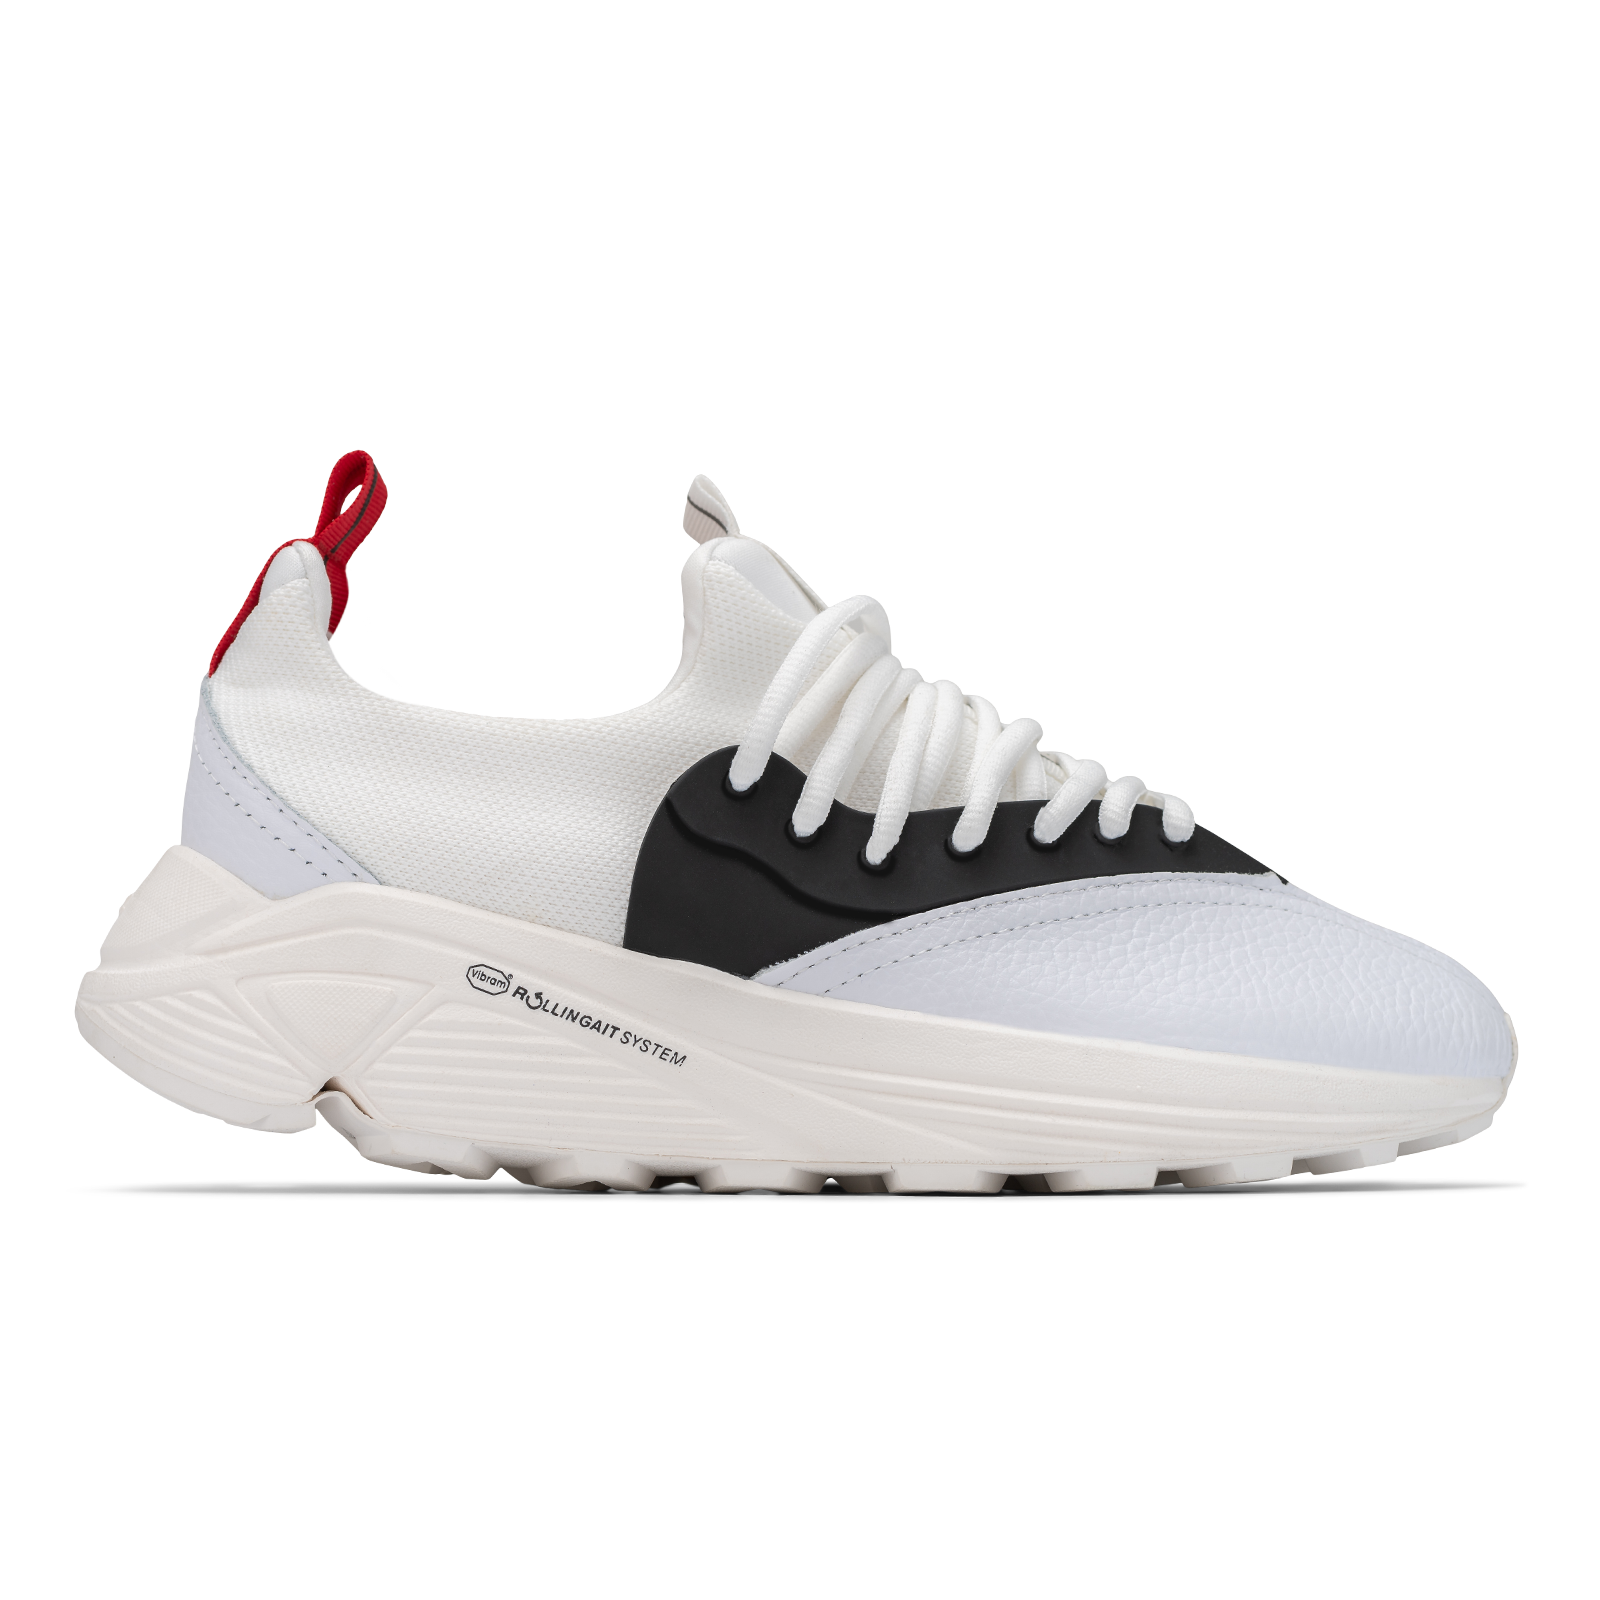 Cloudstryk Ace, white and black sneaker, vibram sole